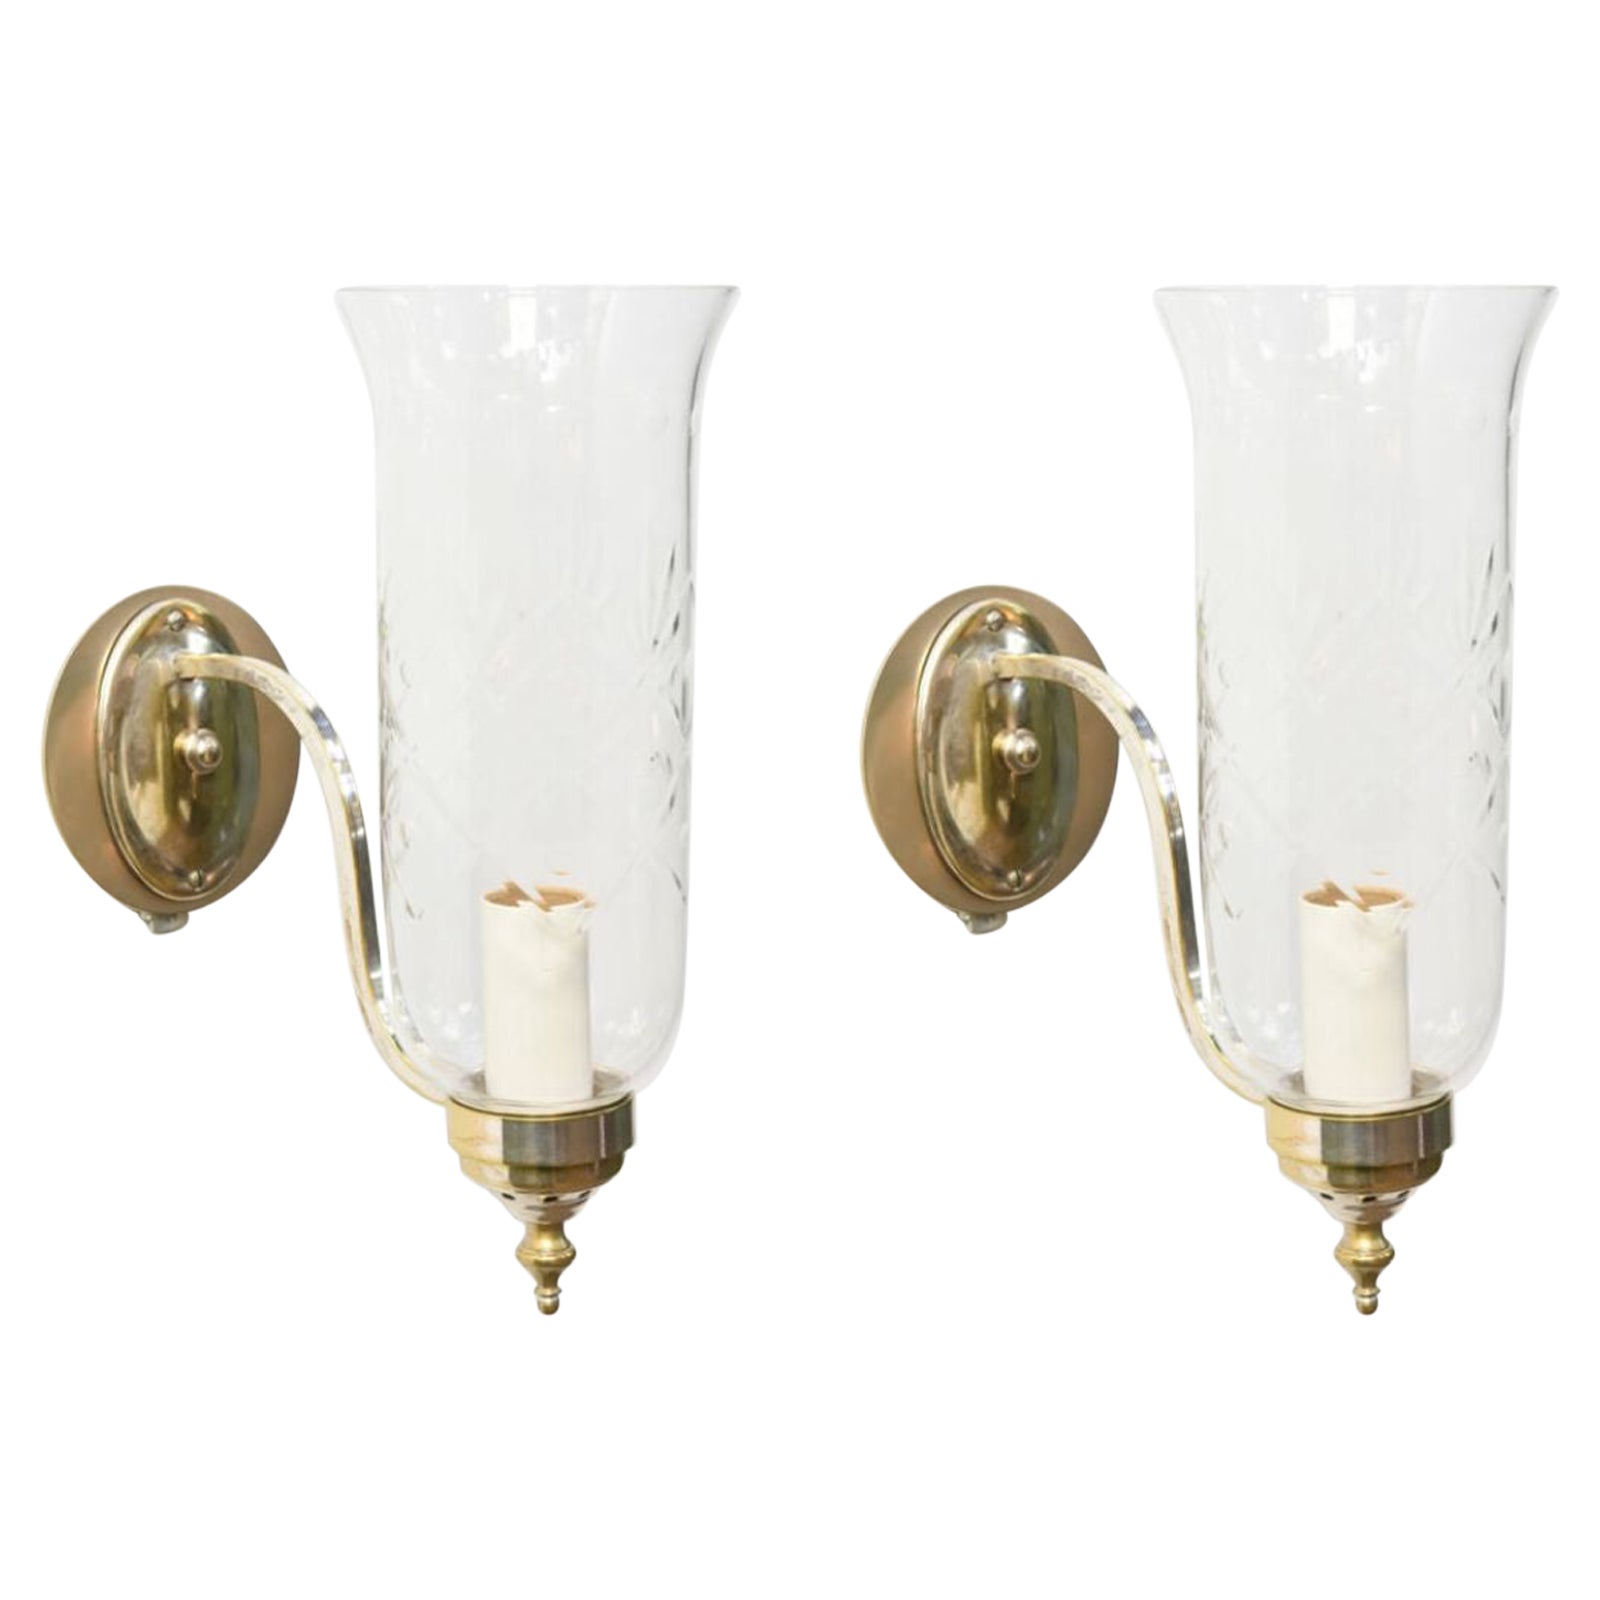 Pair of Silver Plate Hurricane Sconces